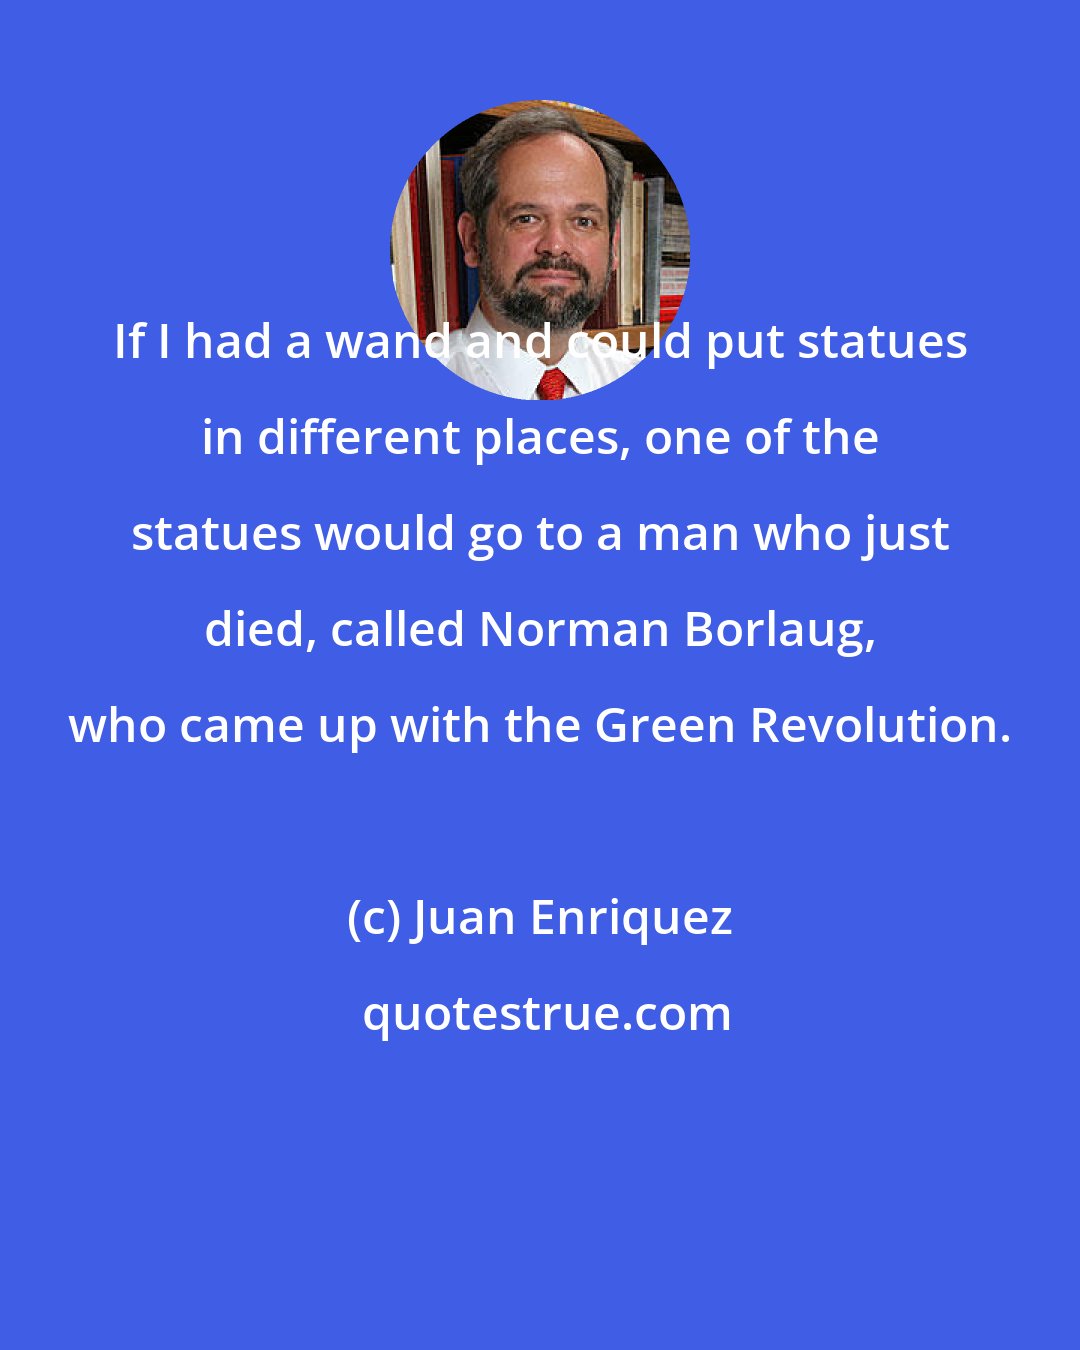 Juan Enriquez: If I had a wand and could put statues in different places, one of the statues would go to a man who just died, called Norman Borlaug, who came up with the Green Revolution.